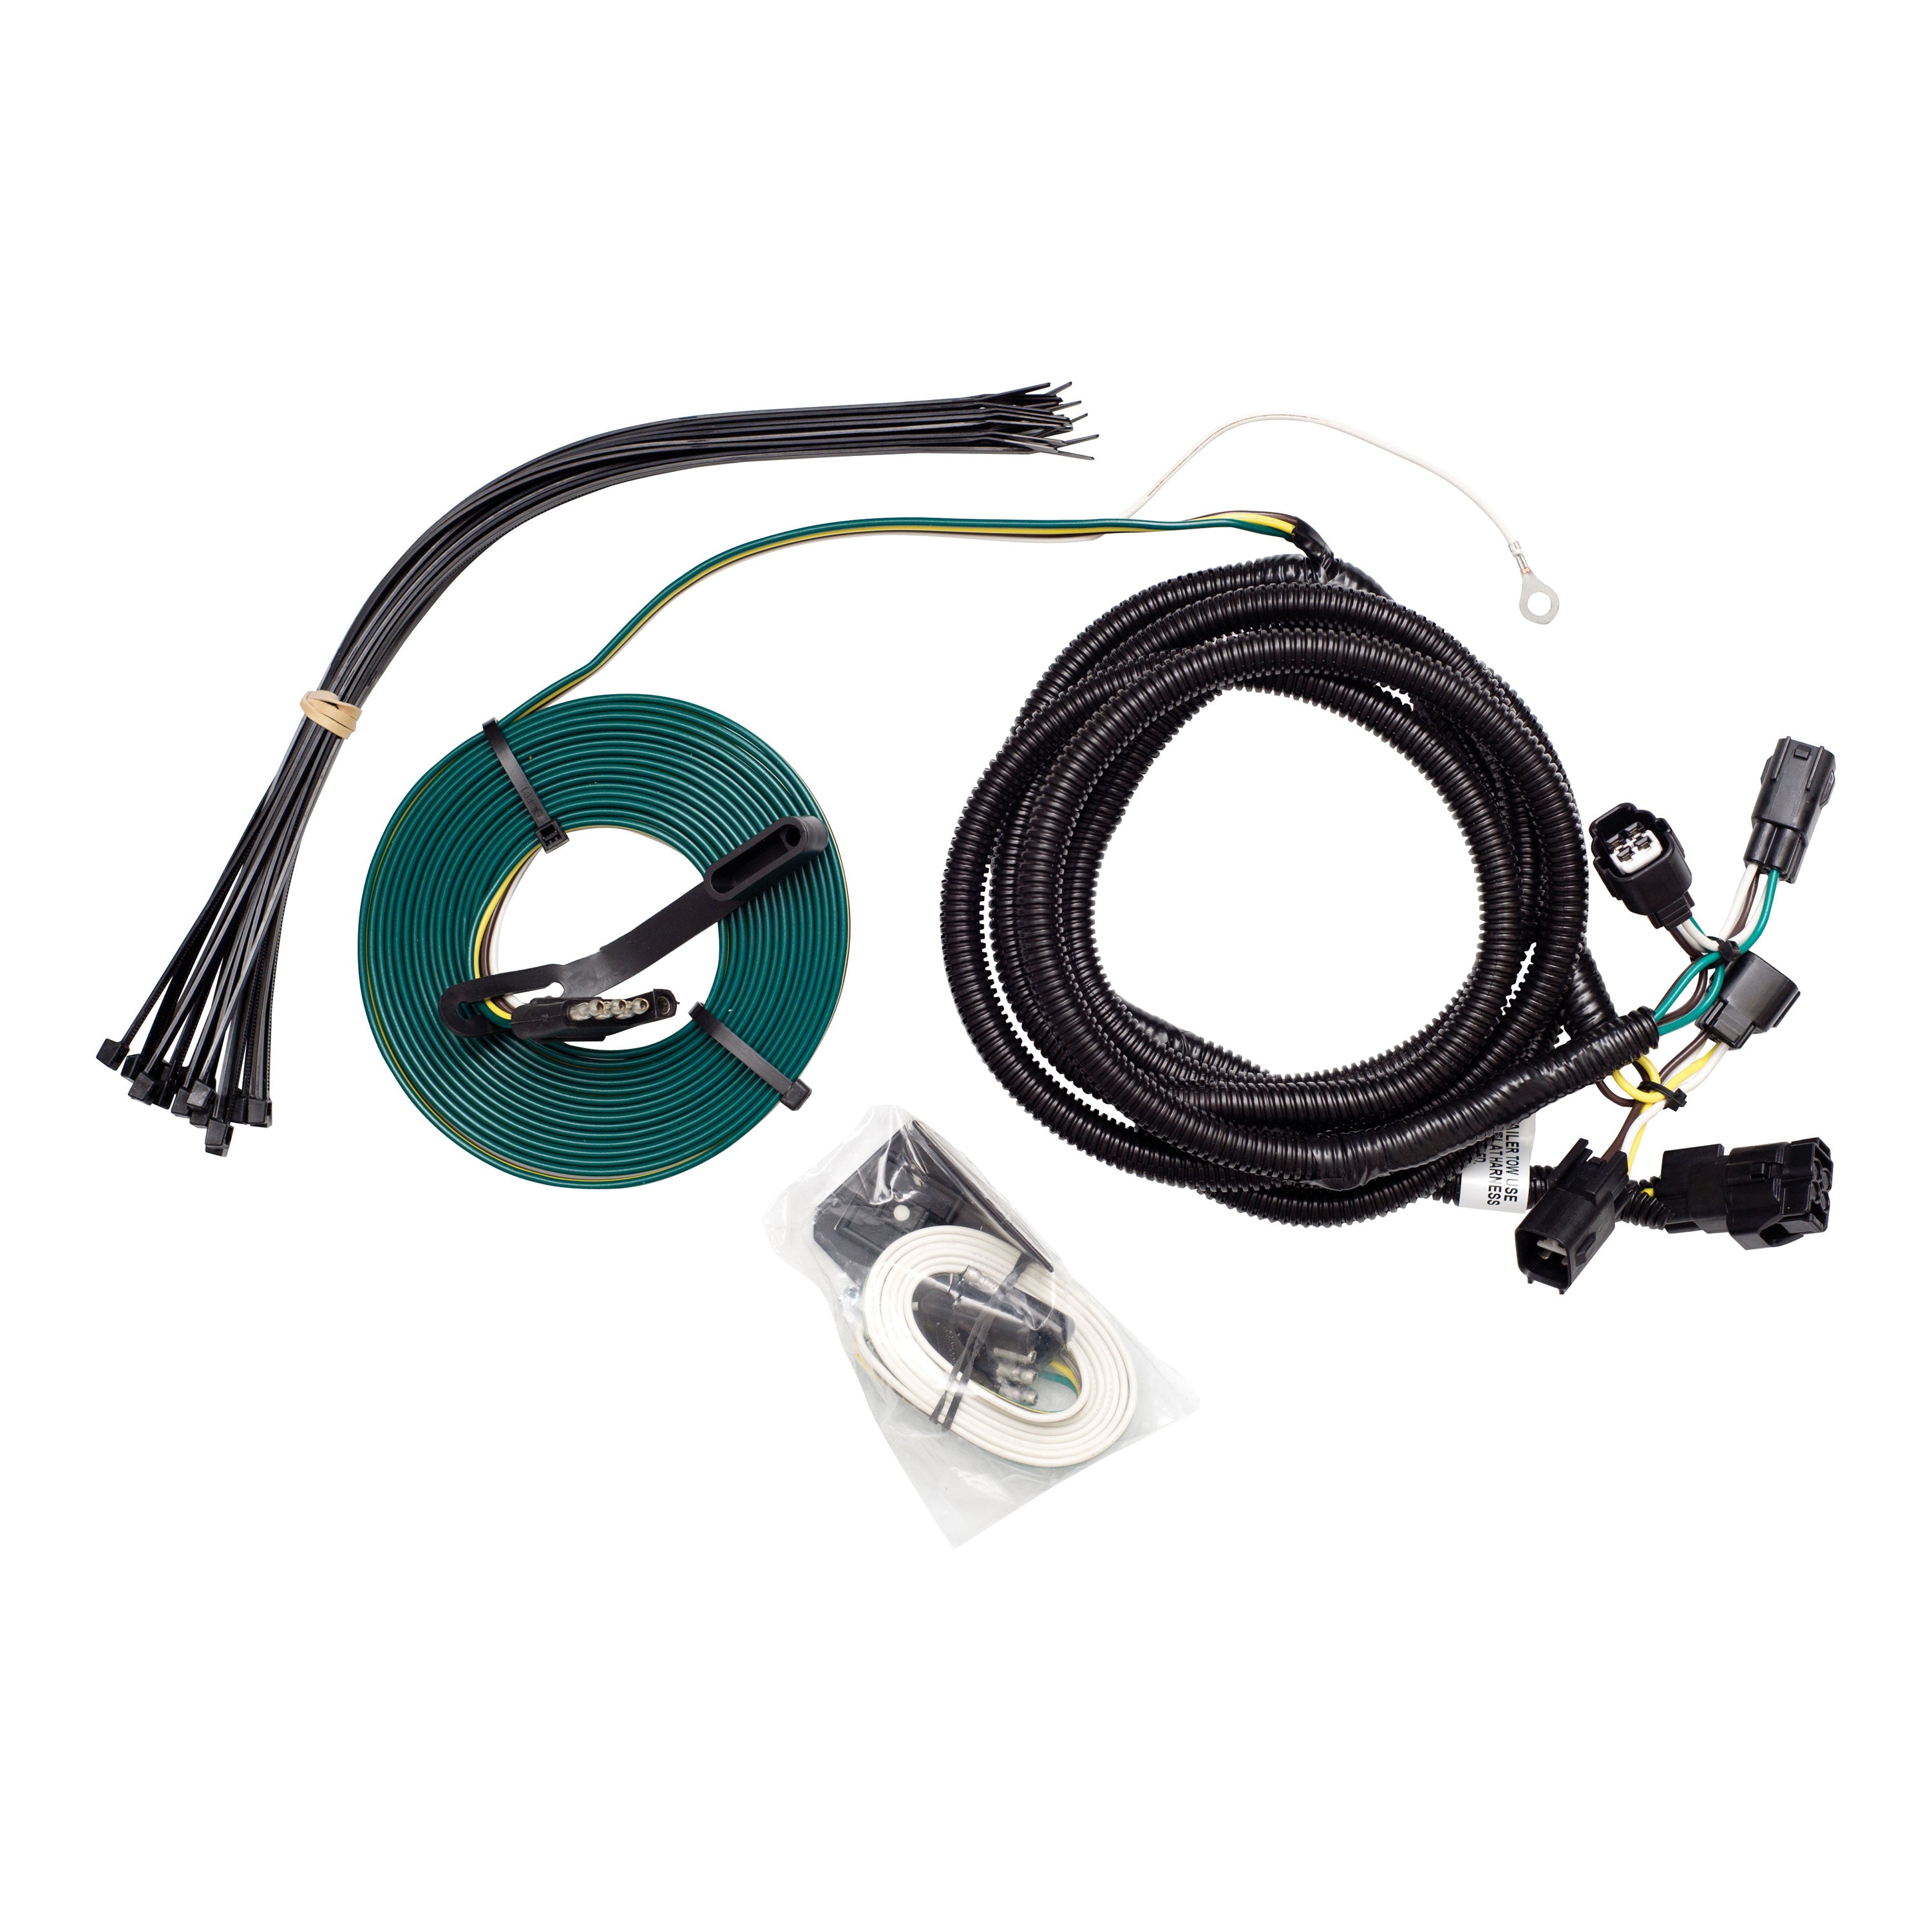 Demco 9523144 Towed Connector Vehicle Wiring Kit for Jeep Liberty '08-'12